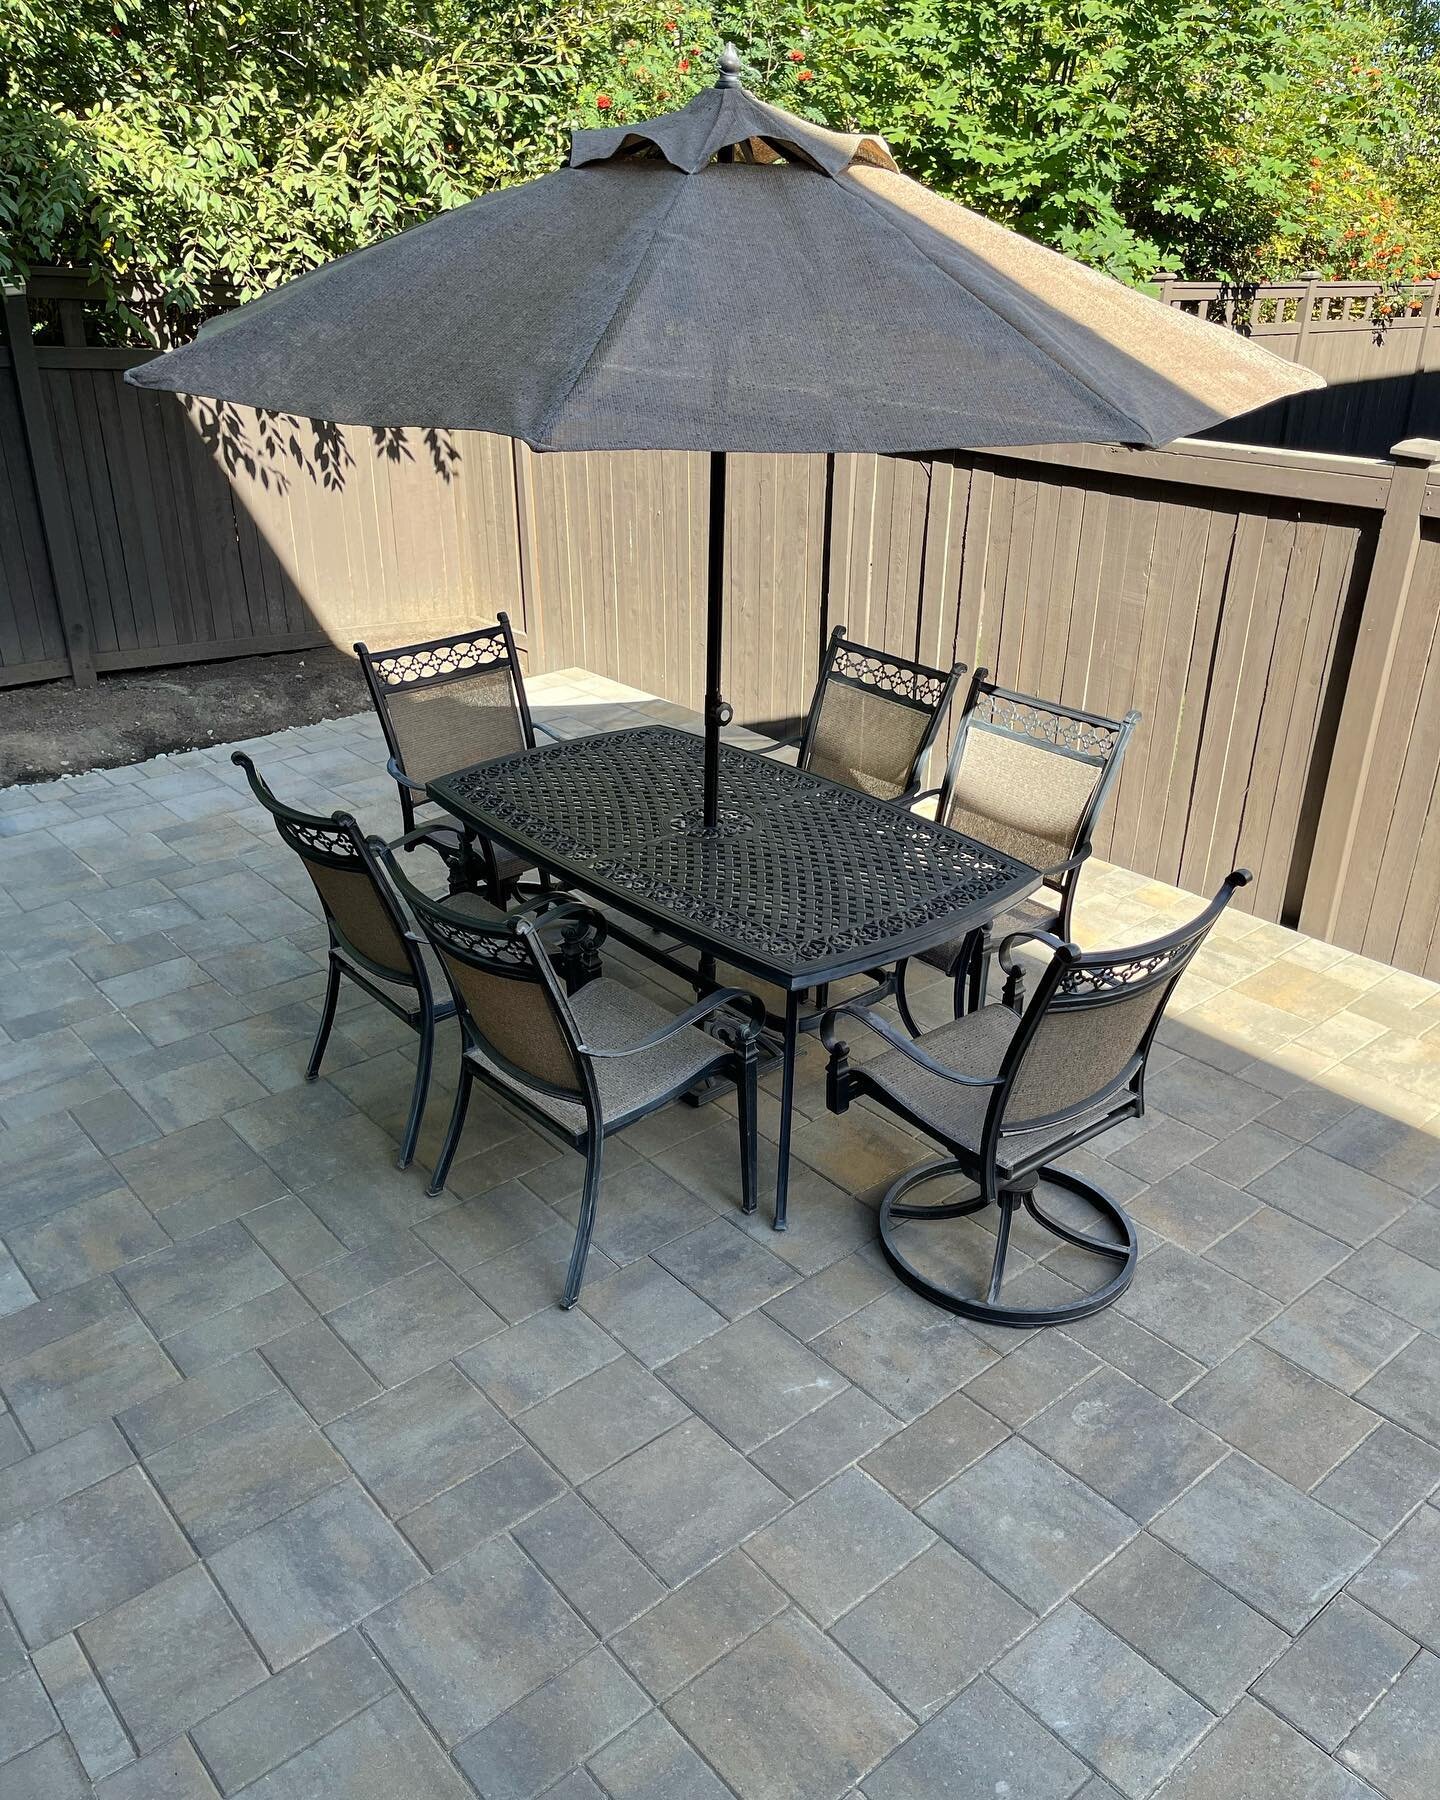 Check out this gorgeous raised paver patio we completed in Lynnwood,WA using Catalina Grana in Victorian with matching border. 

#lslandscaping #hardscape #patio #pavers #catalinagranapaver #outdoorliving